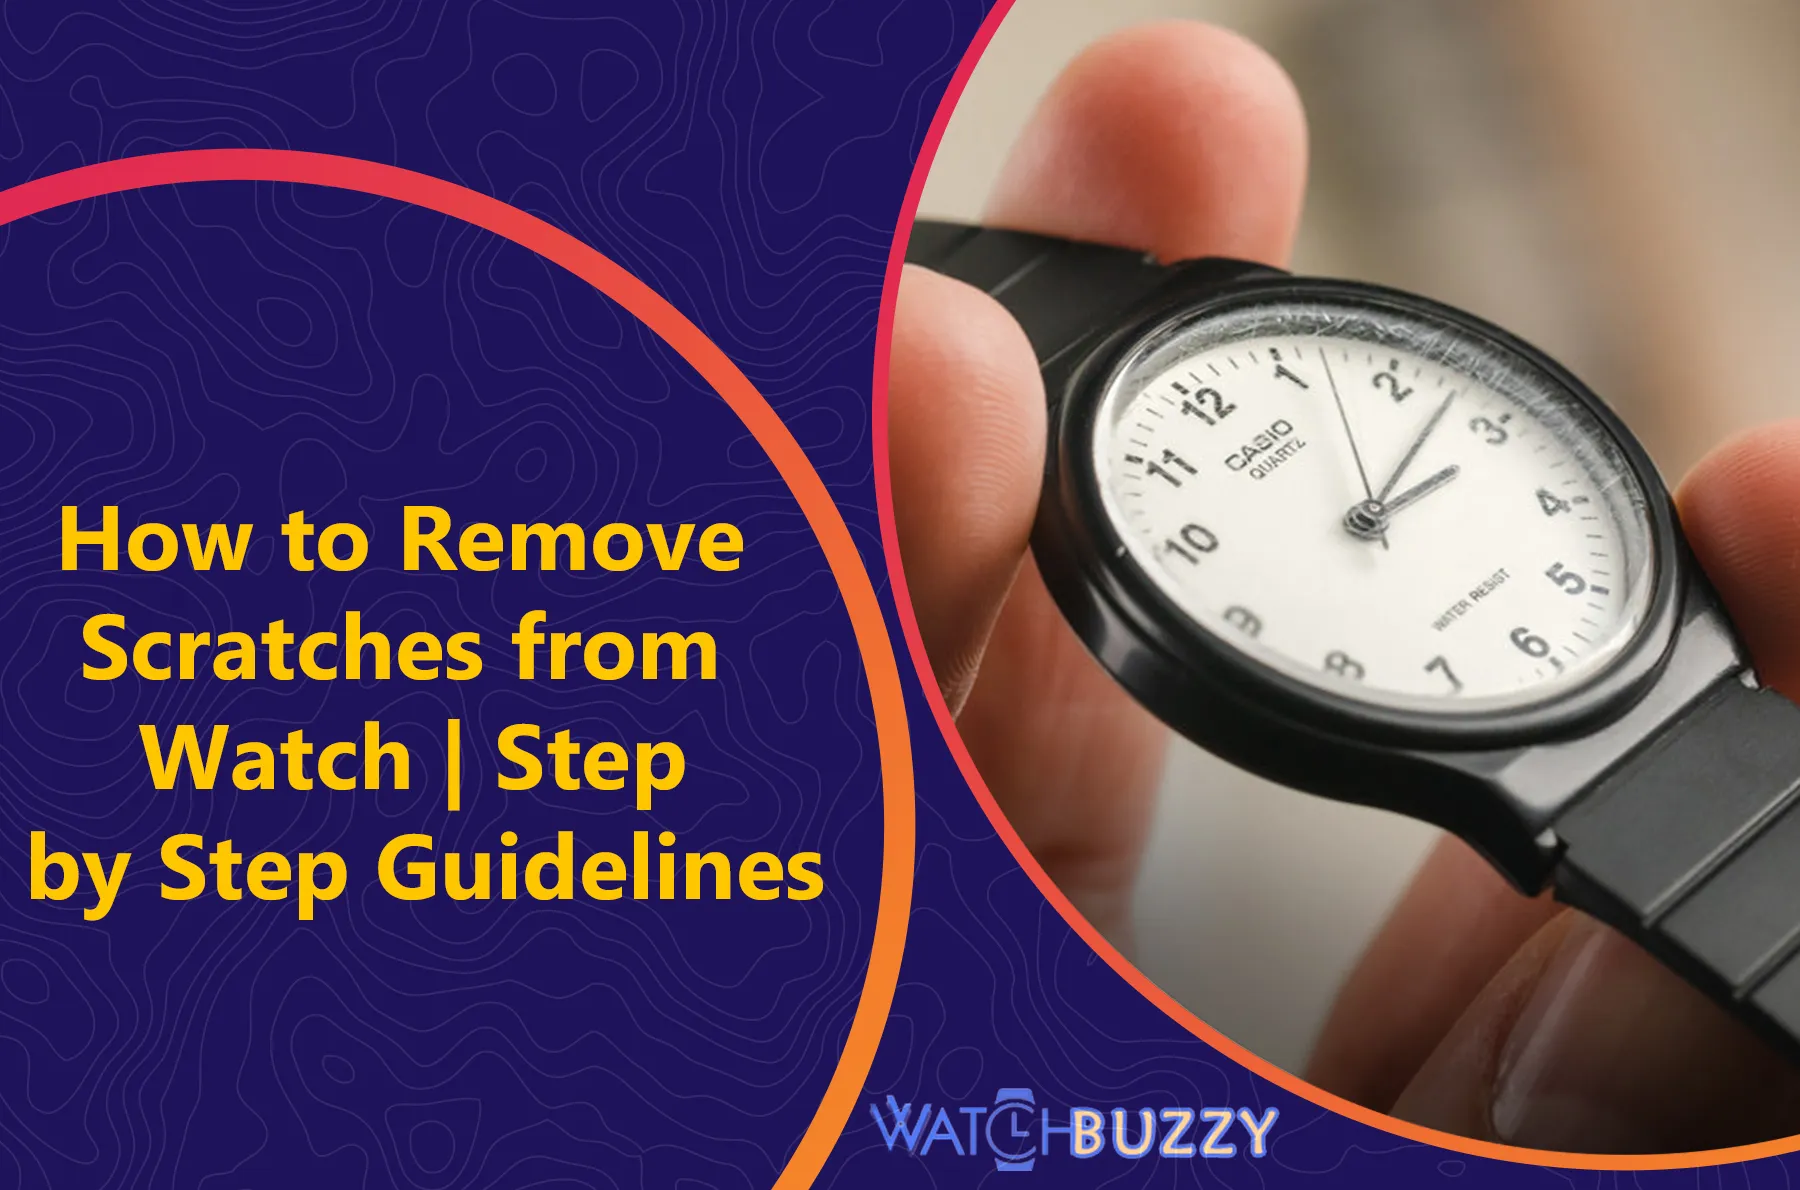 How to Remove Scratches from Watch | Step by Step Guidelines